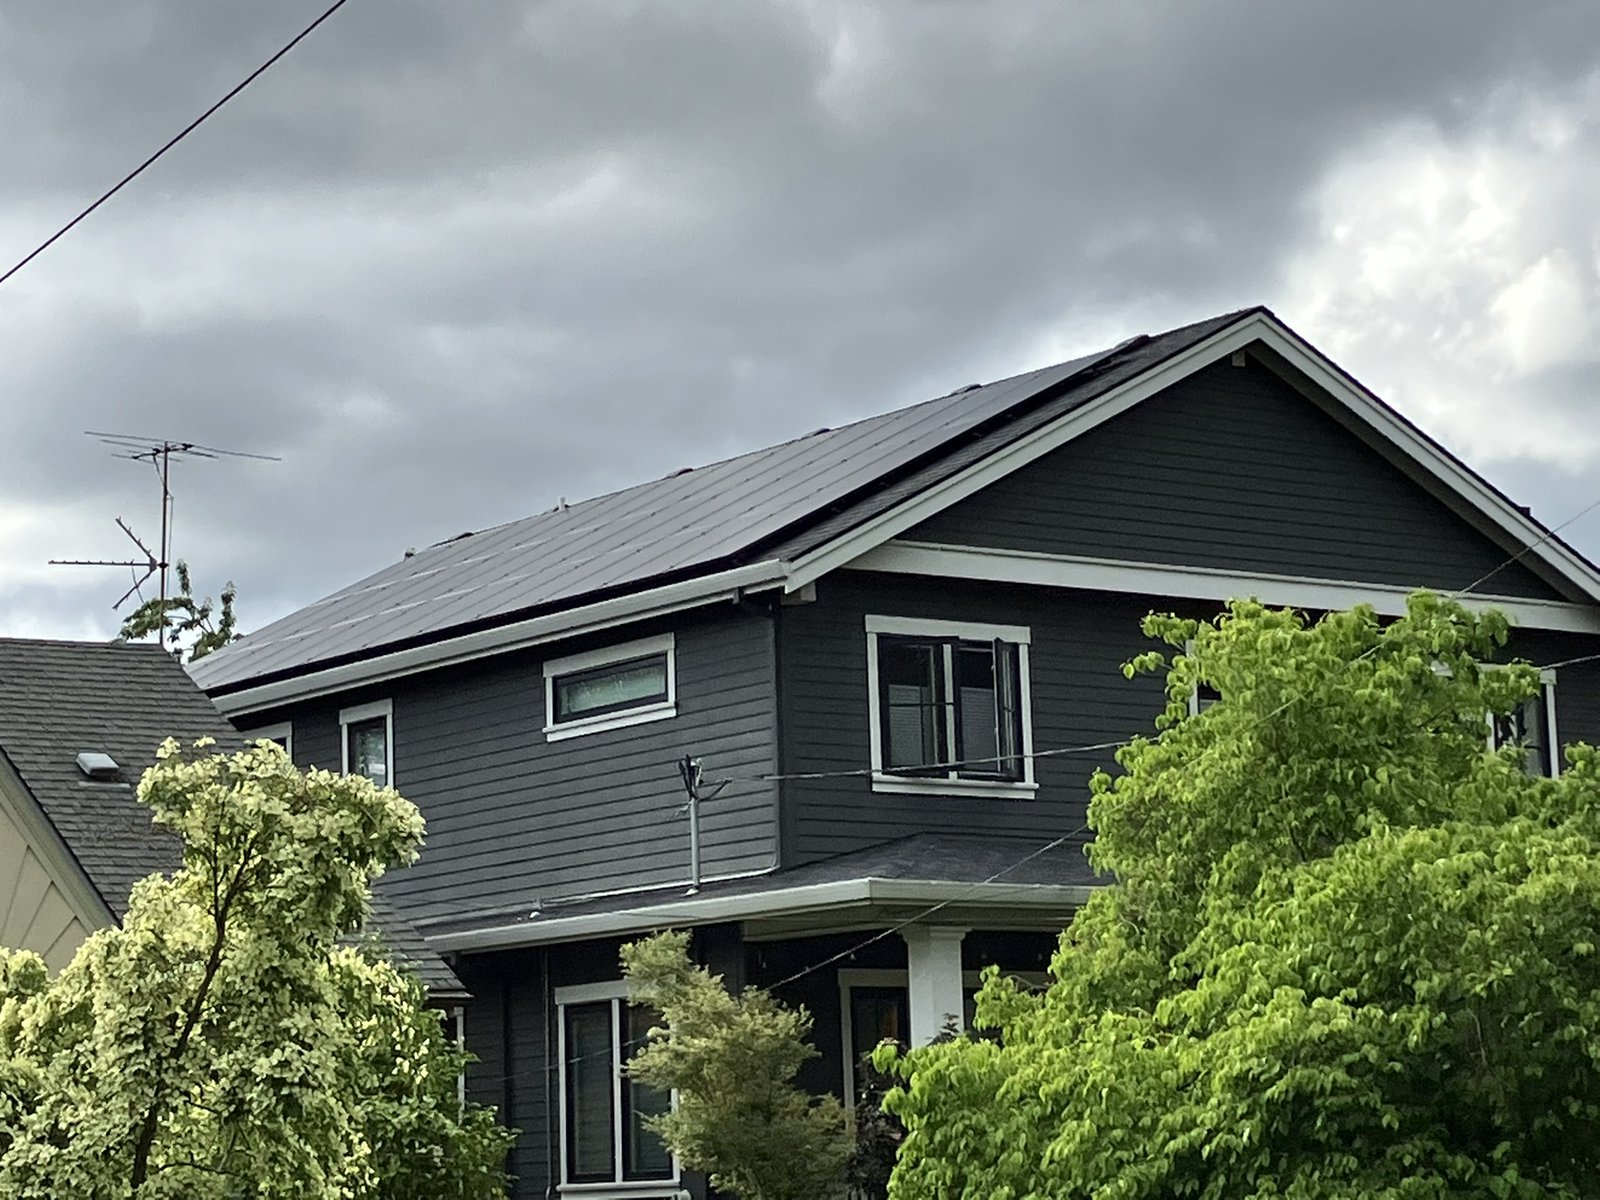 A grey house with solar panels on the roof under cloudy skies.